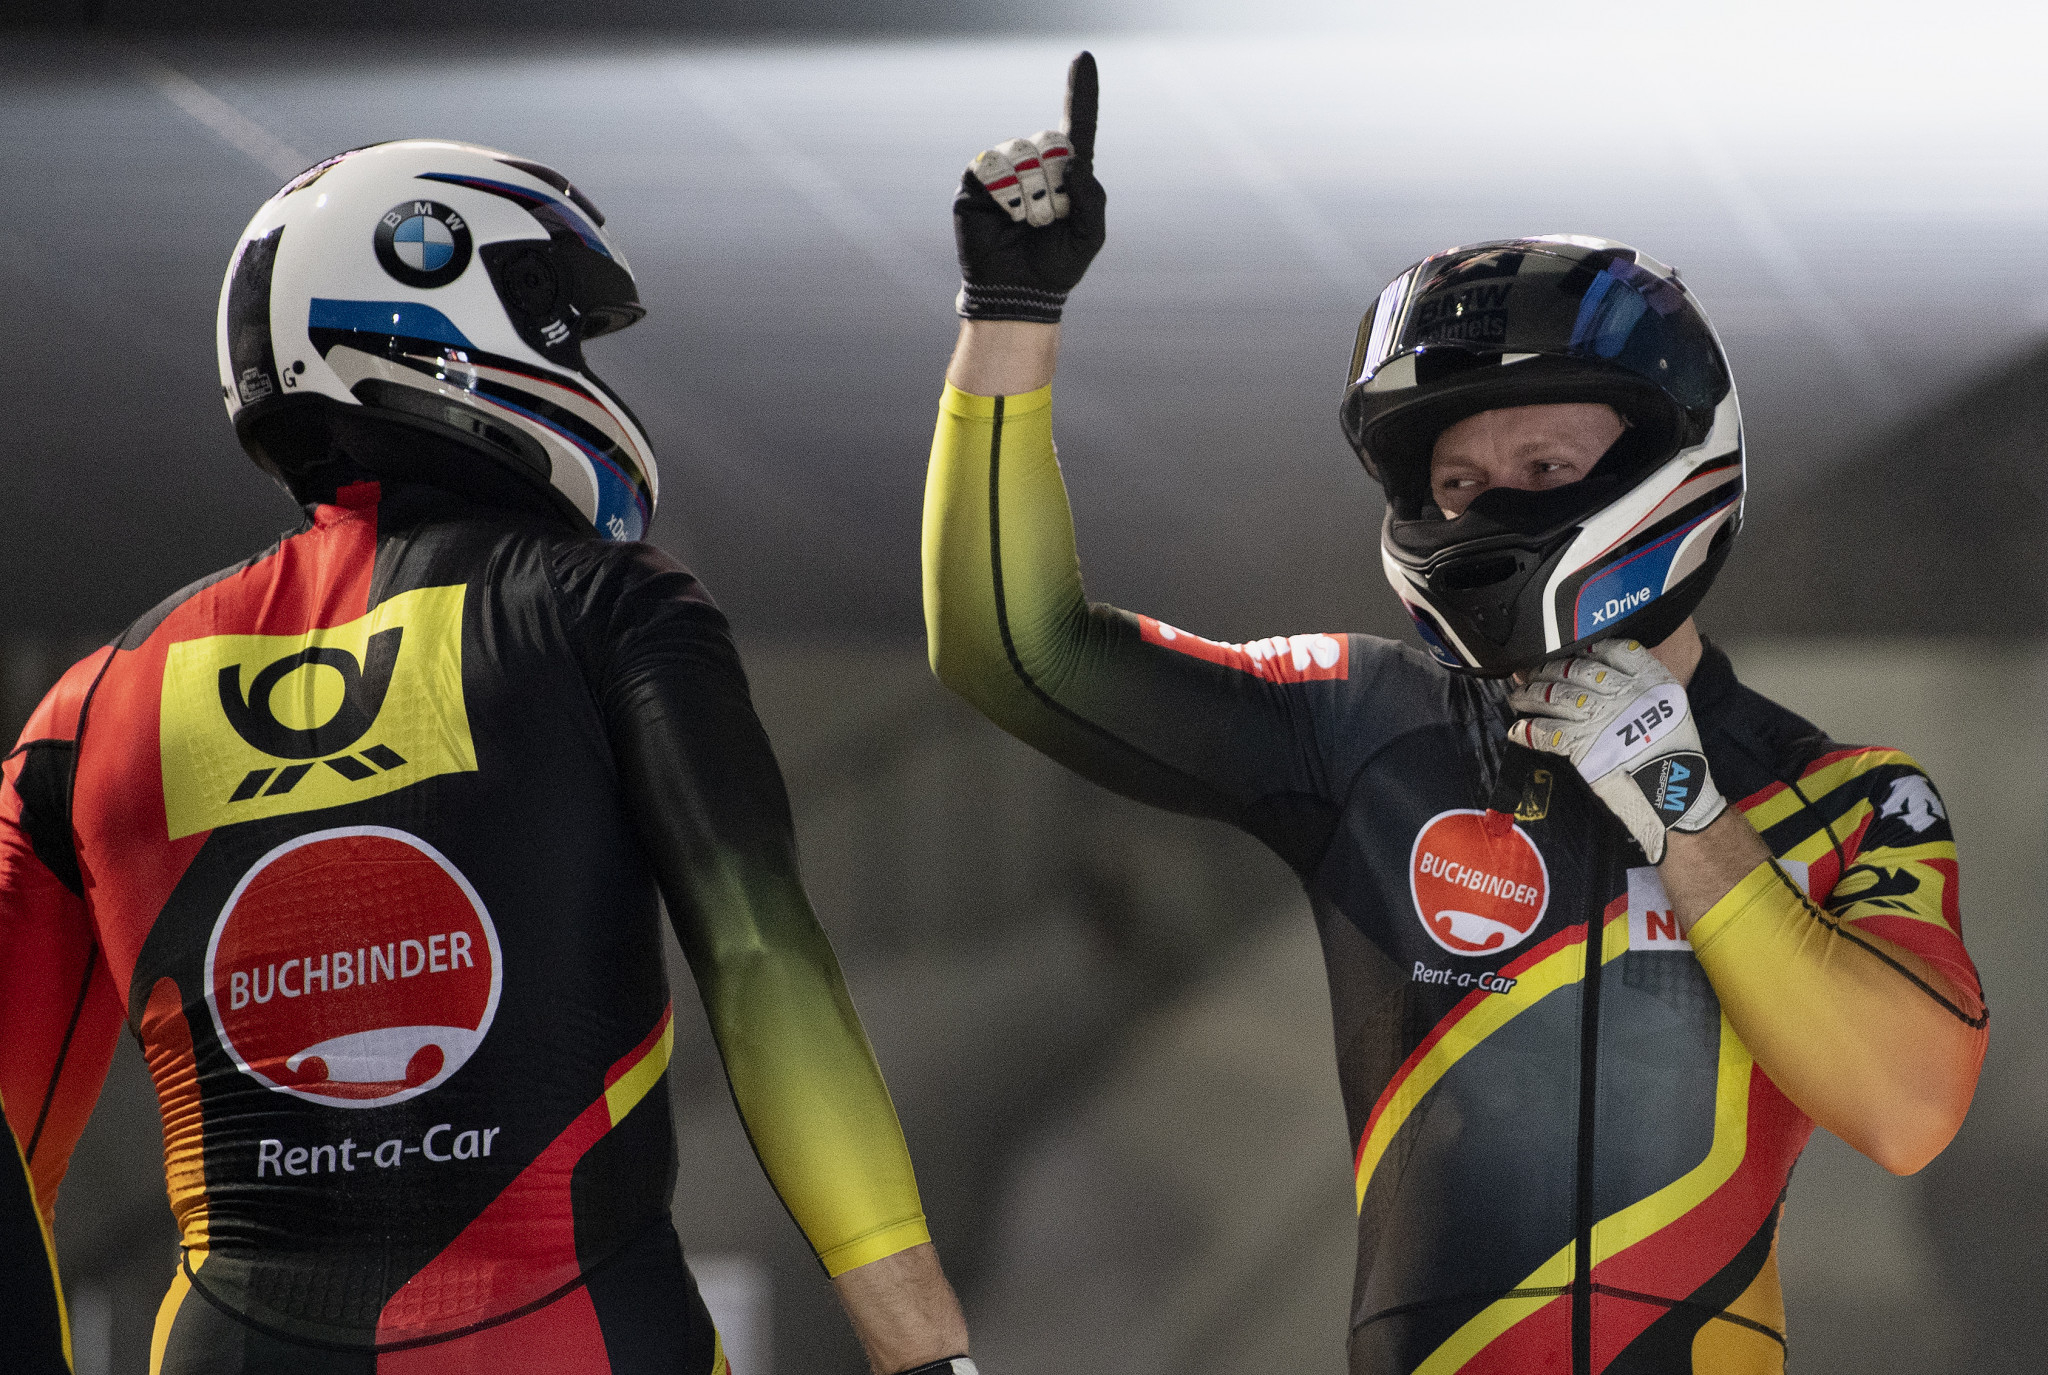 Germany's Francesco Friedrich is leading the two-man and four-man bobsleigh standings going into the IBSF World Cup event in Lake Placid ©Getty Images